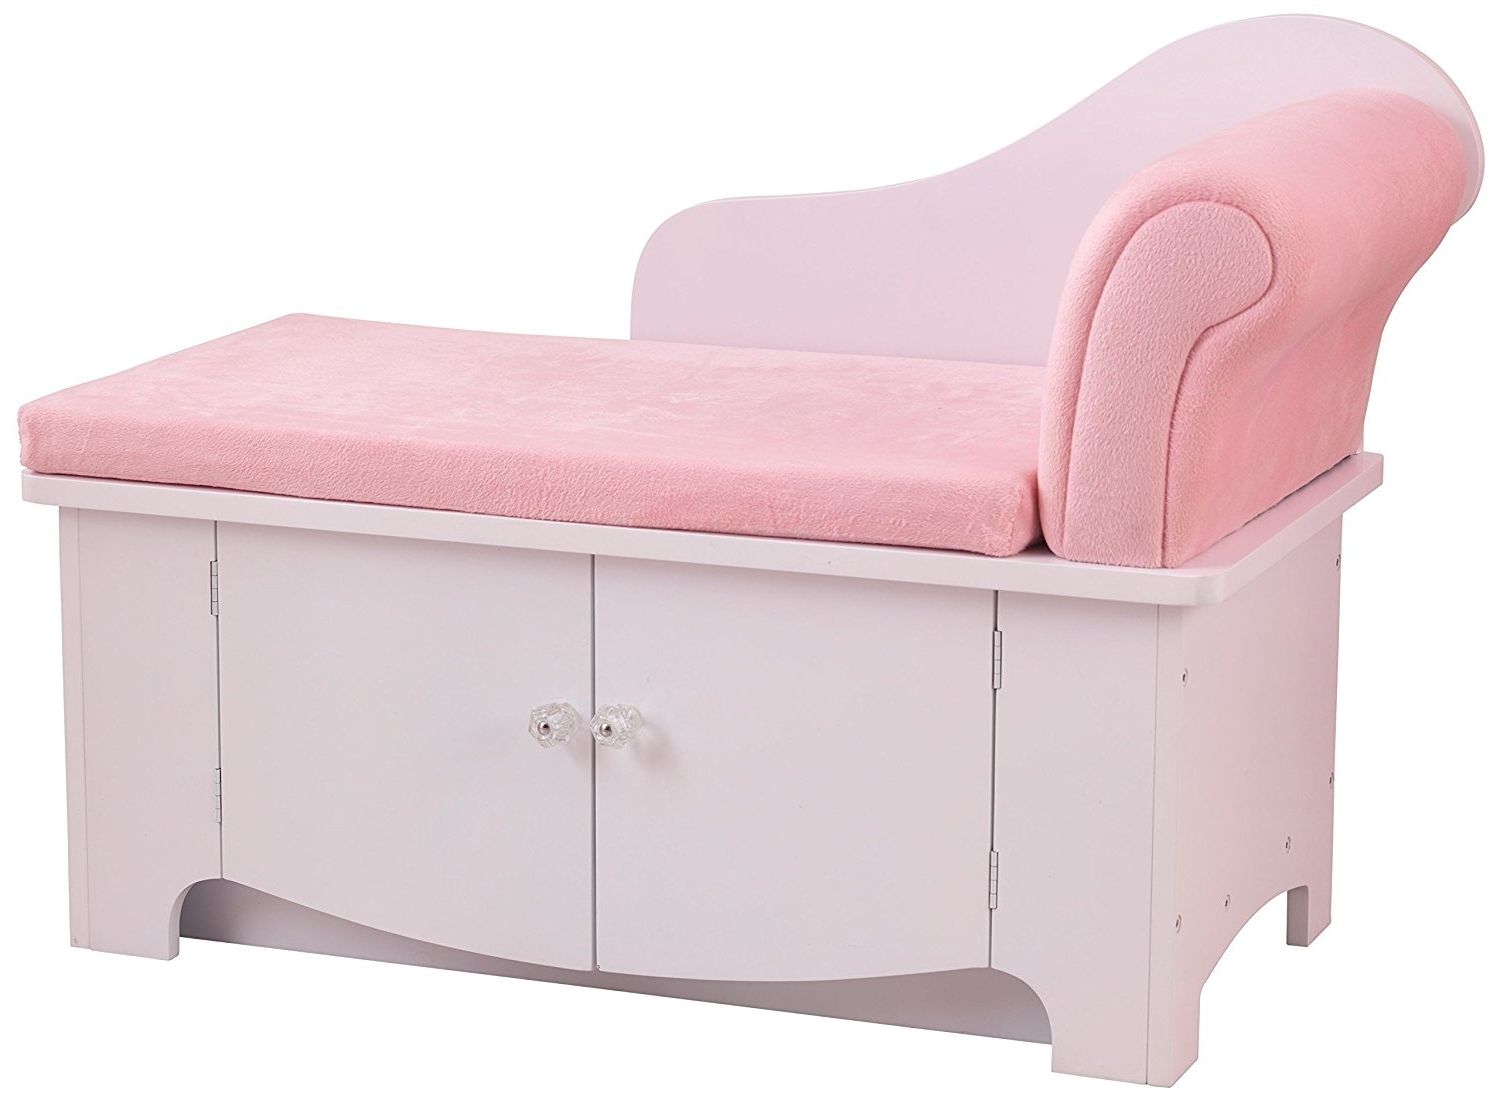 Well Known Amazon: Kidkraft Girl's Princess Chaise Lounge: Toys & Games With Pink Chaises (View 15 of 15)